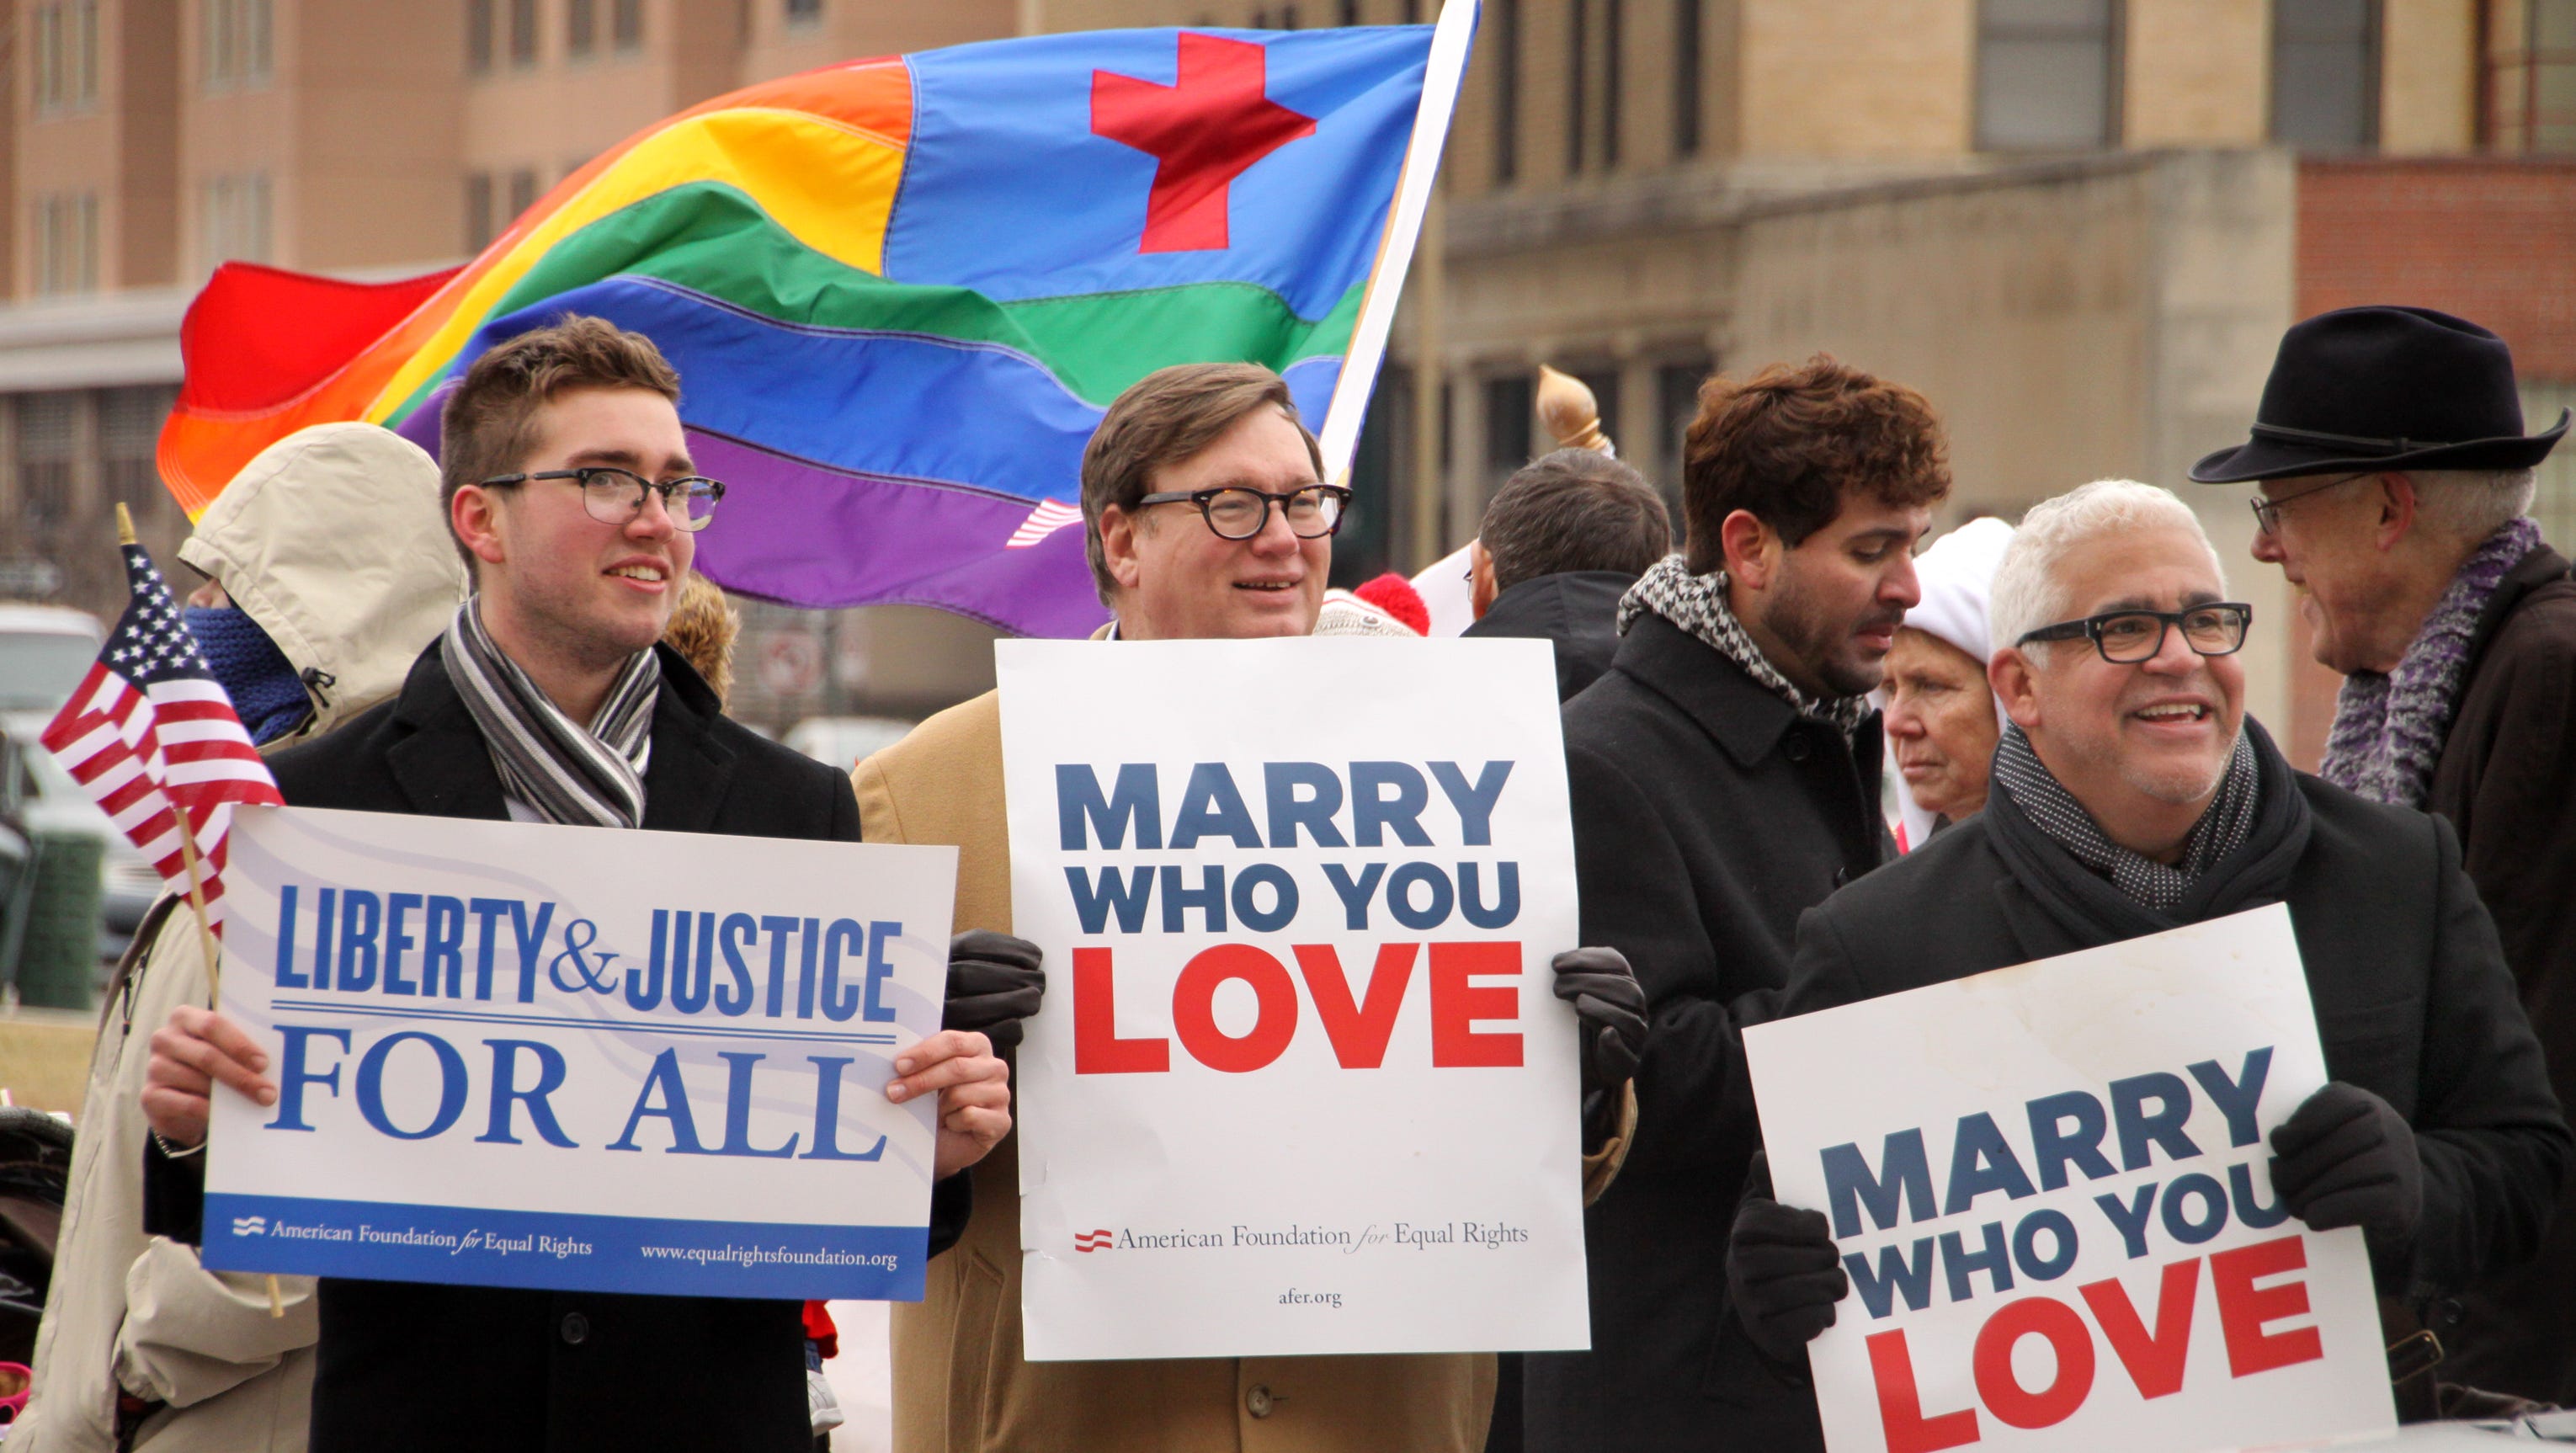 Conservative States Propel Same Sex Marriage Movement